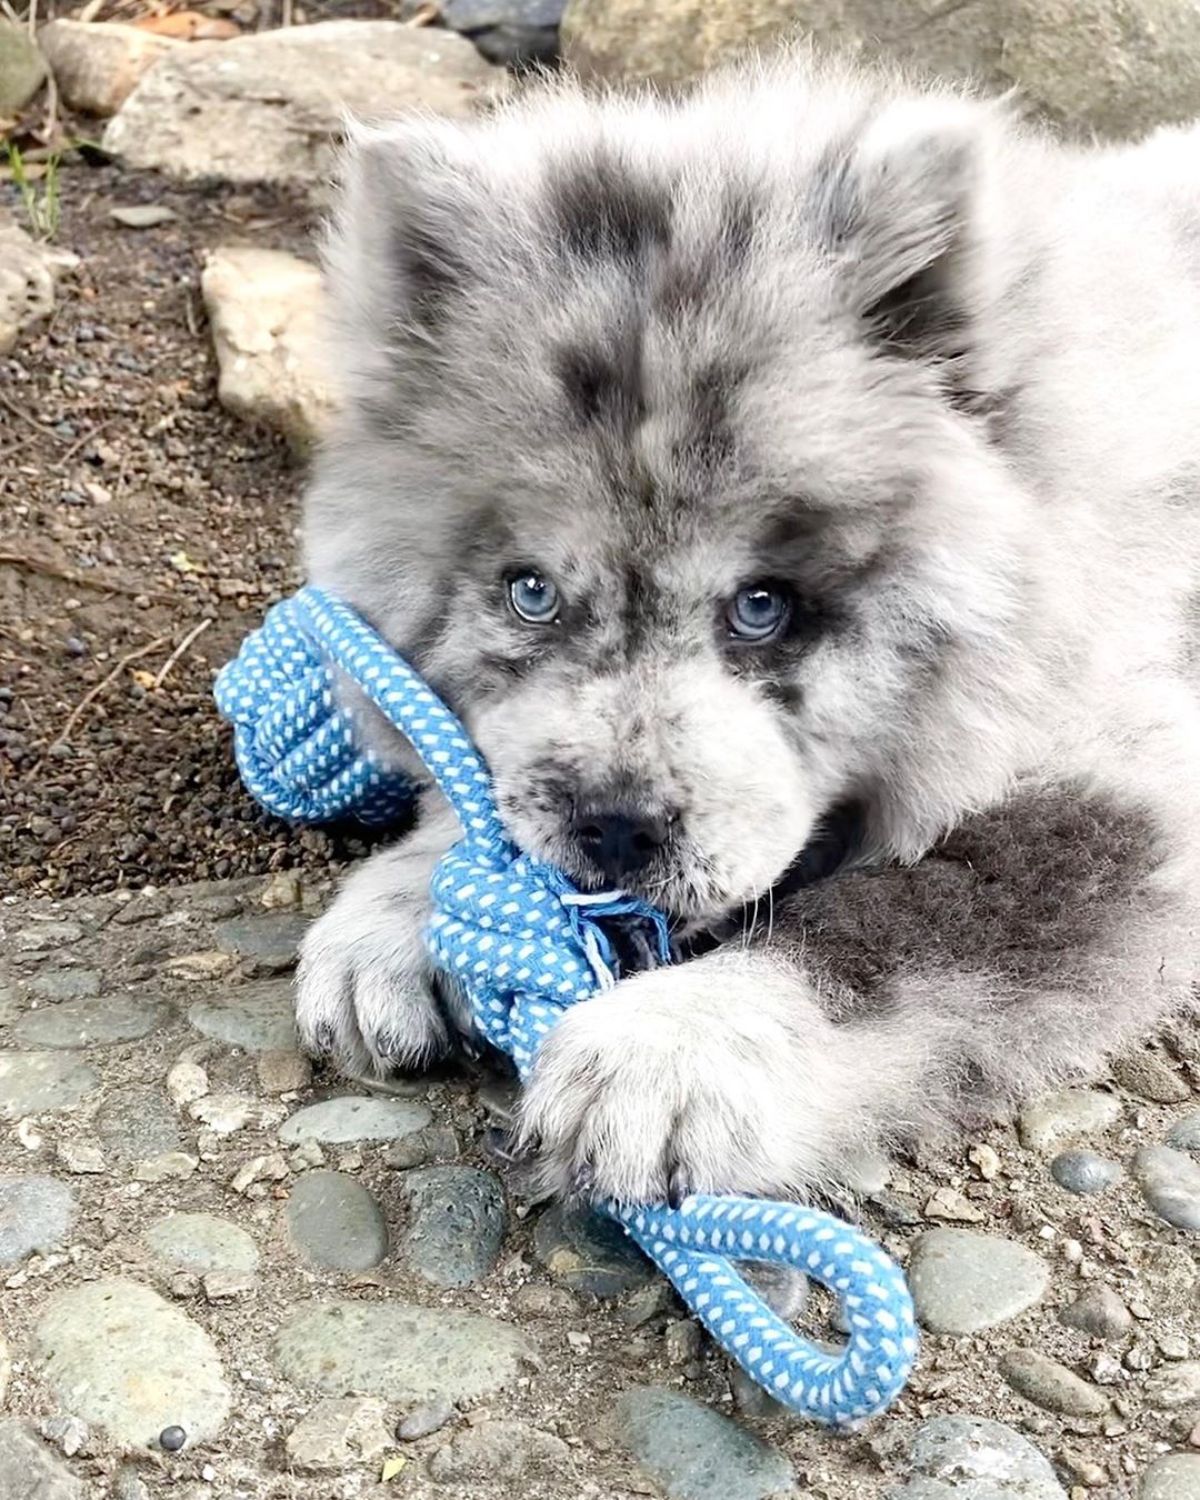 black and white chow chow biting into a blue toy